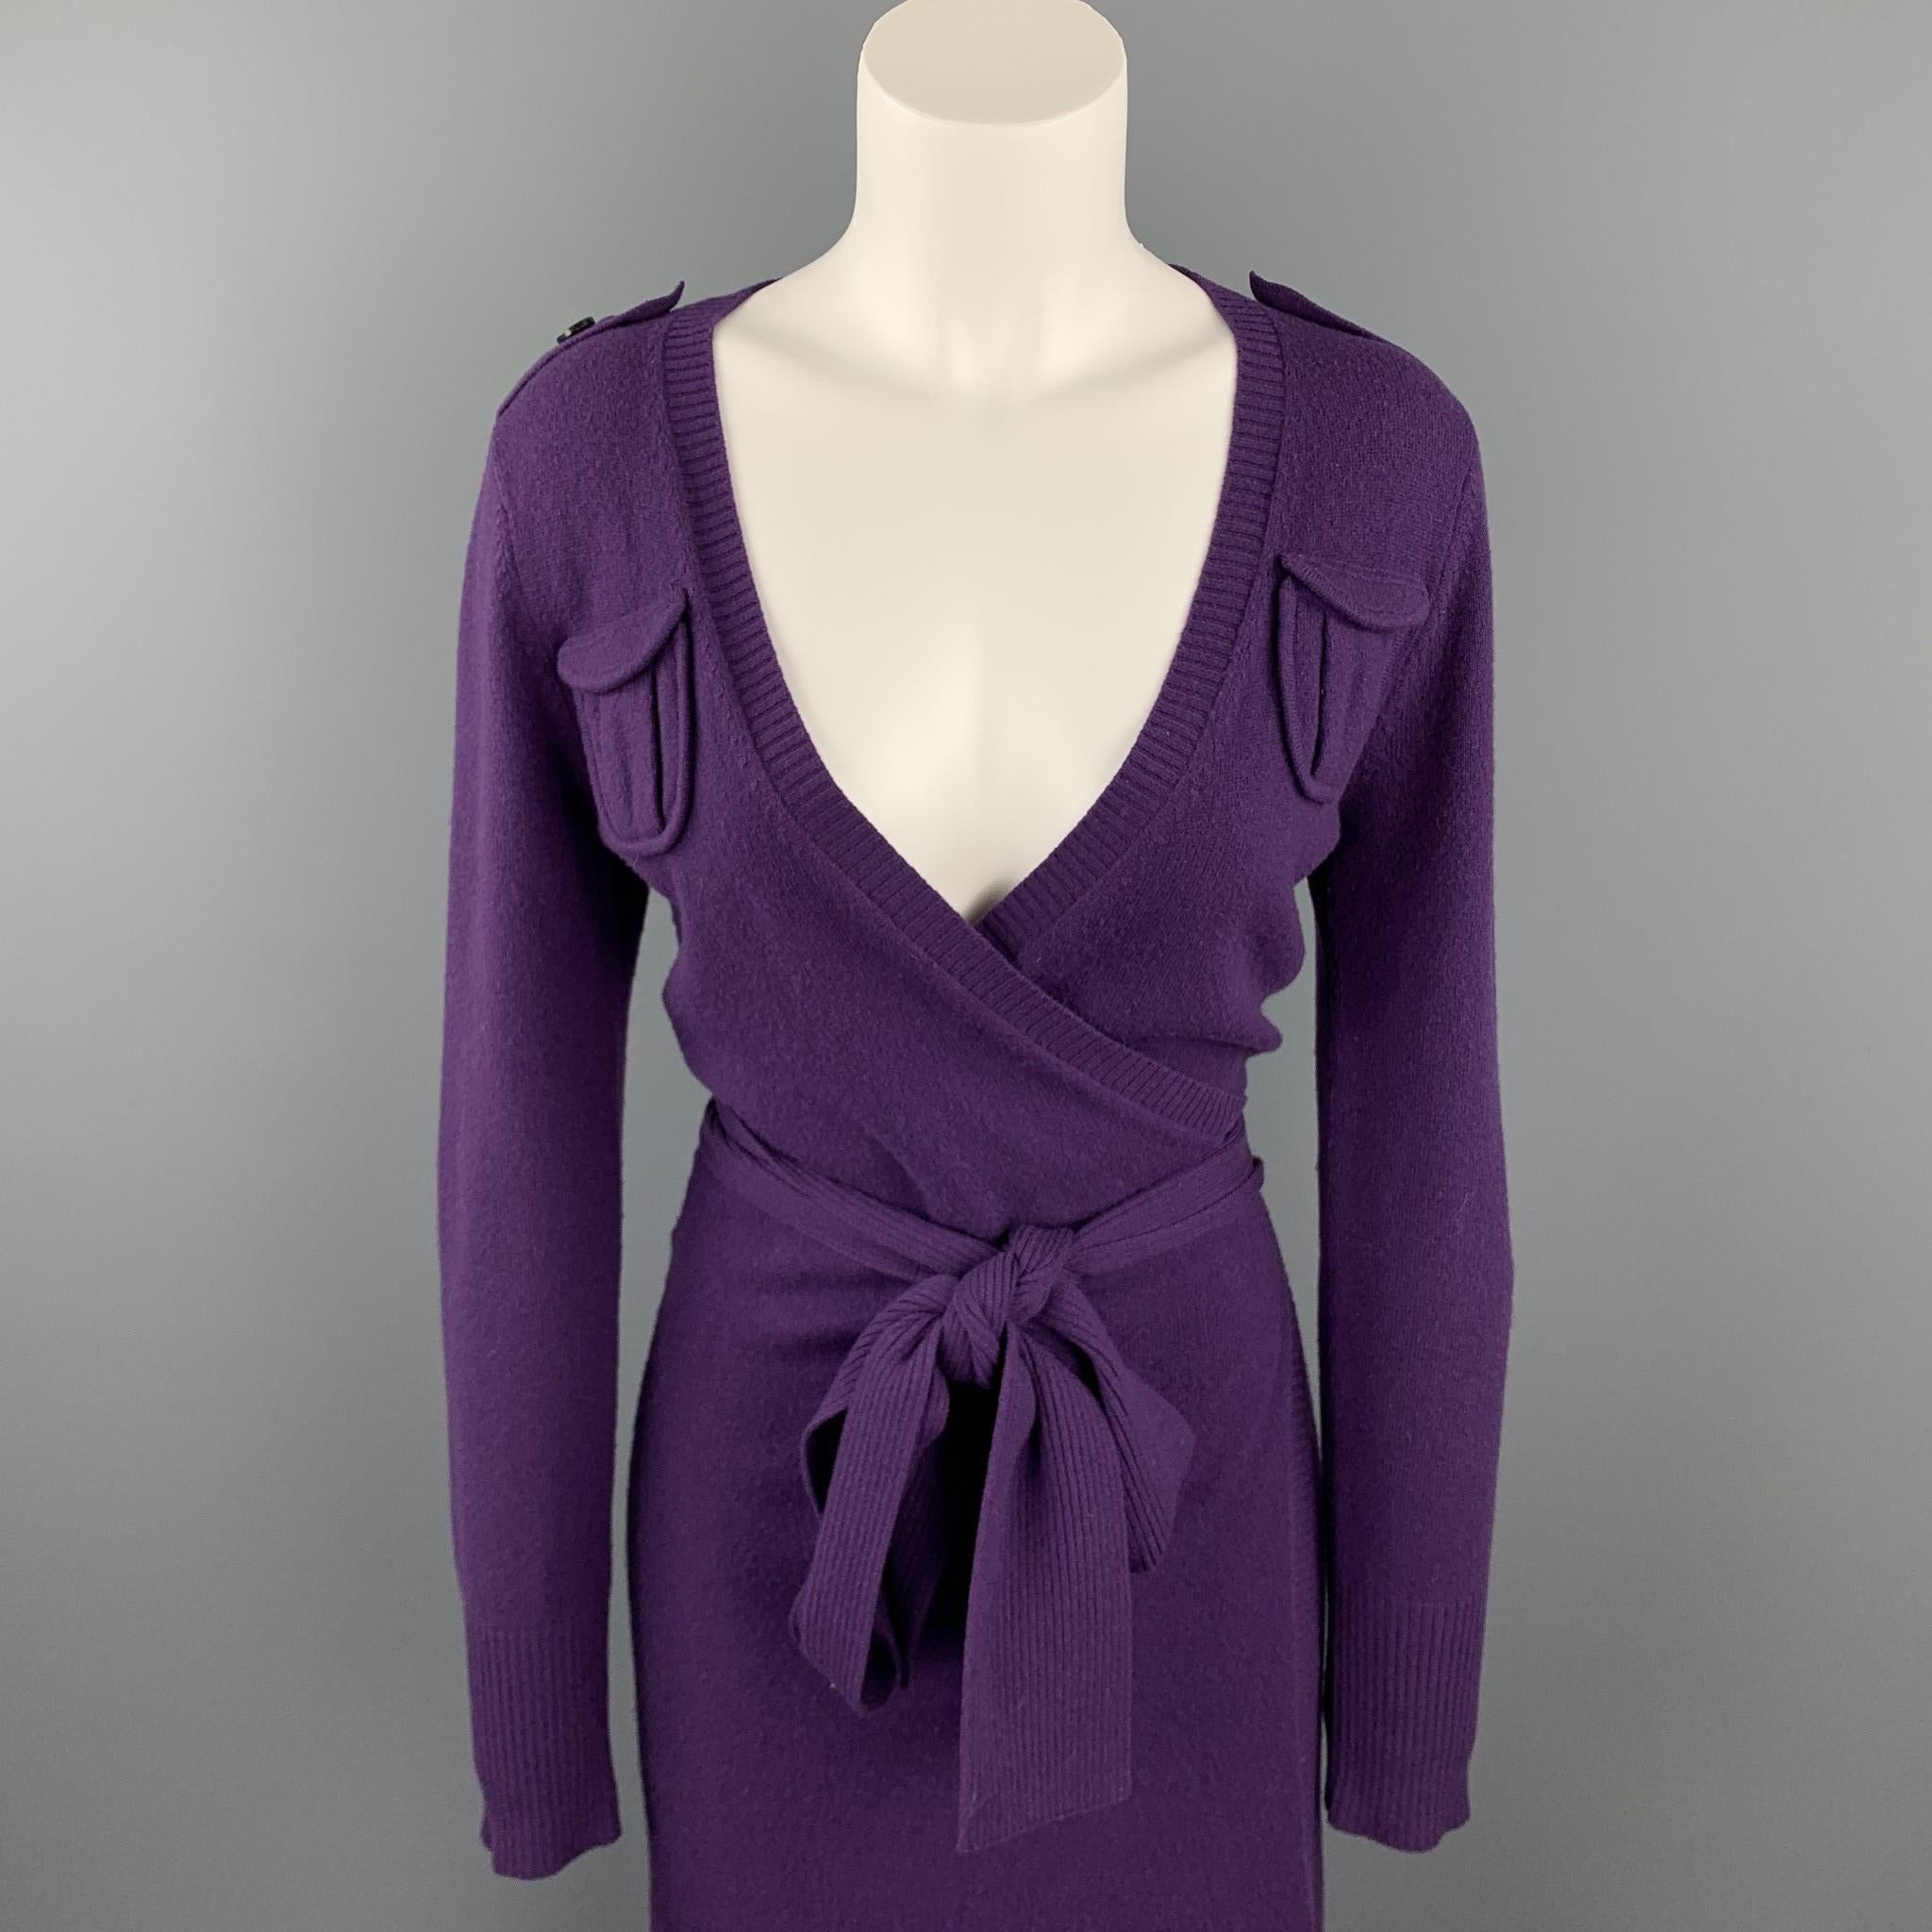 DIANE VON FURSTENBERG dress comes in a purple knitted wool blend featuring a wrap style, front pockets, epaulettes, and a belted closure. 

Good Pre-Owned Condition.
Marked: S

Measurements:

Shoulder: 16 in. 
Bust: 34 in. 
Waist: 25 in.
Hip: 37 in.